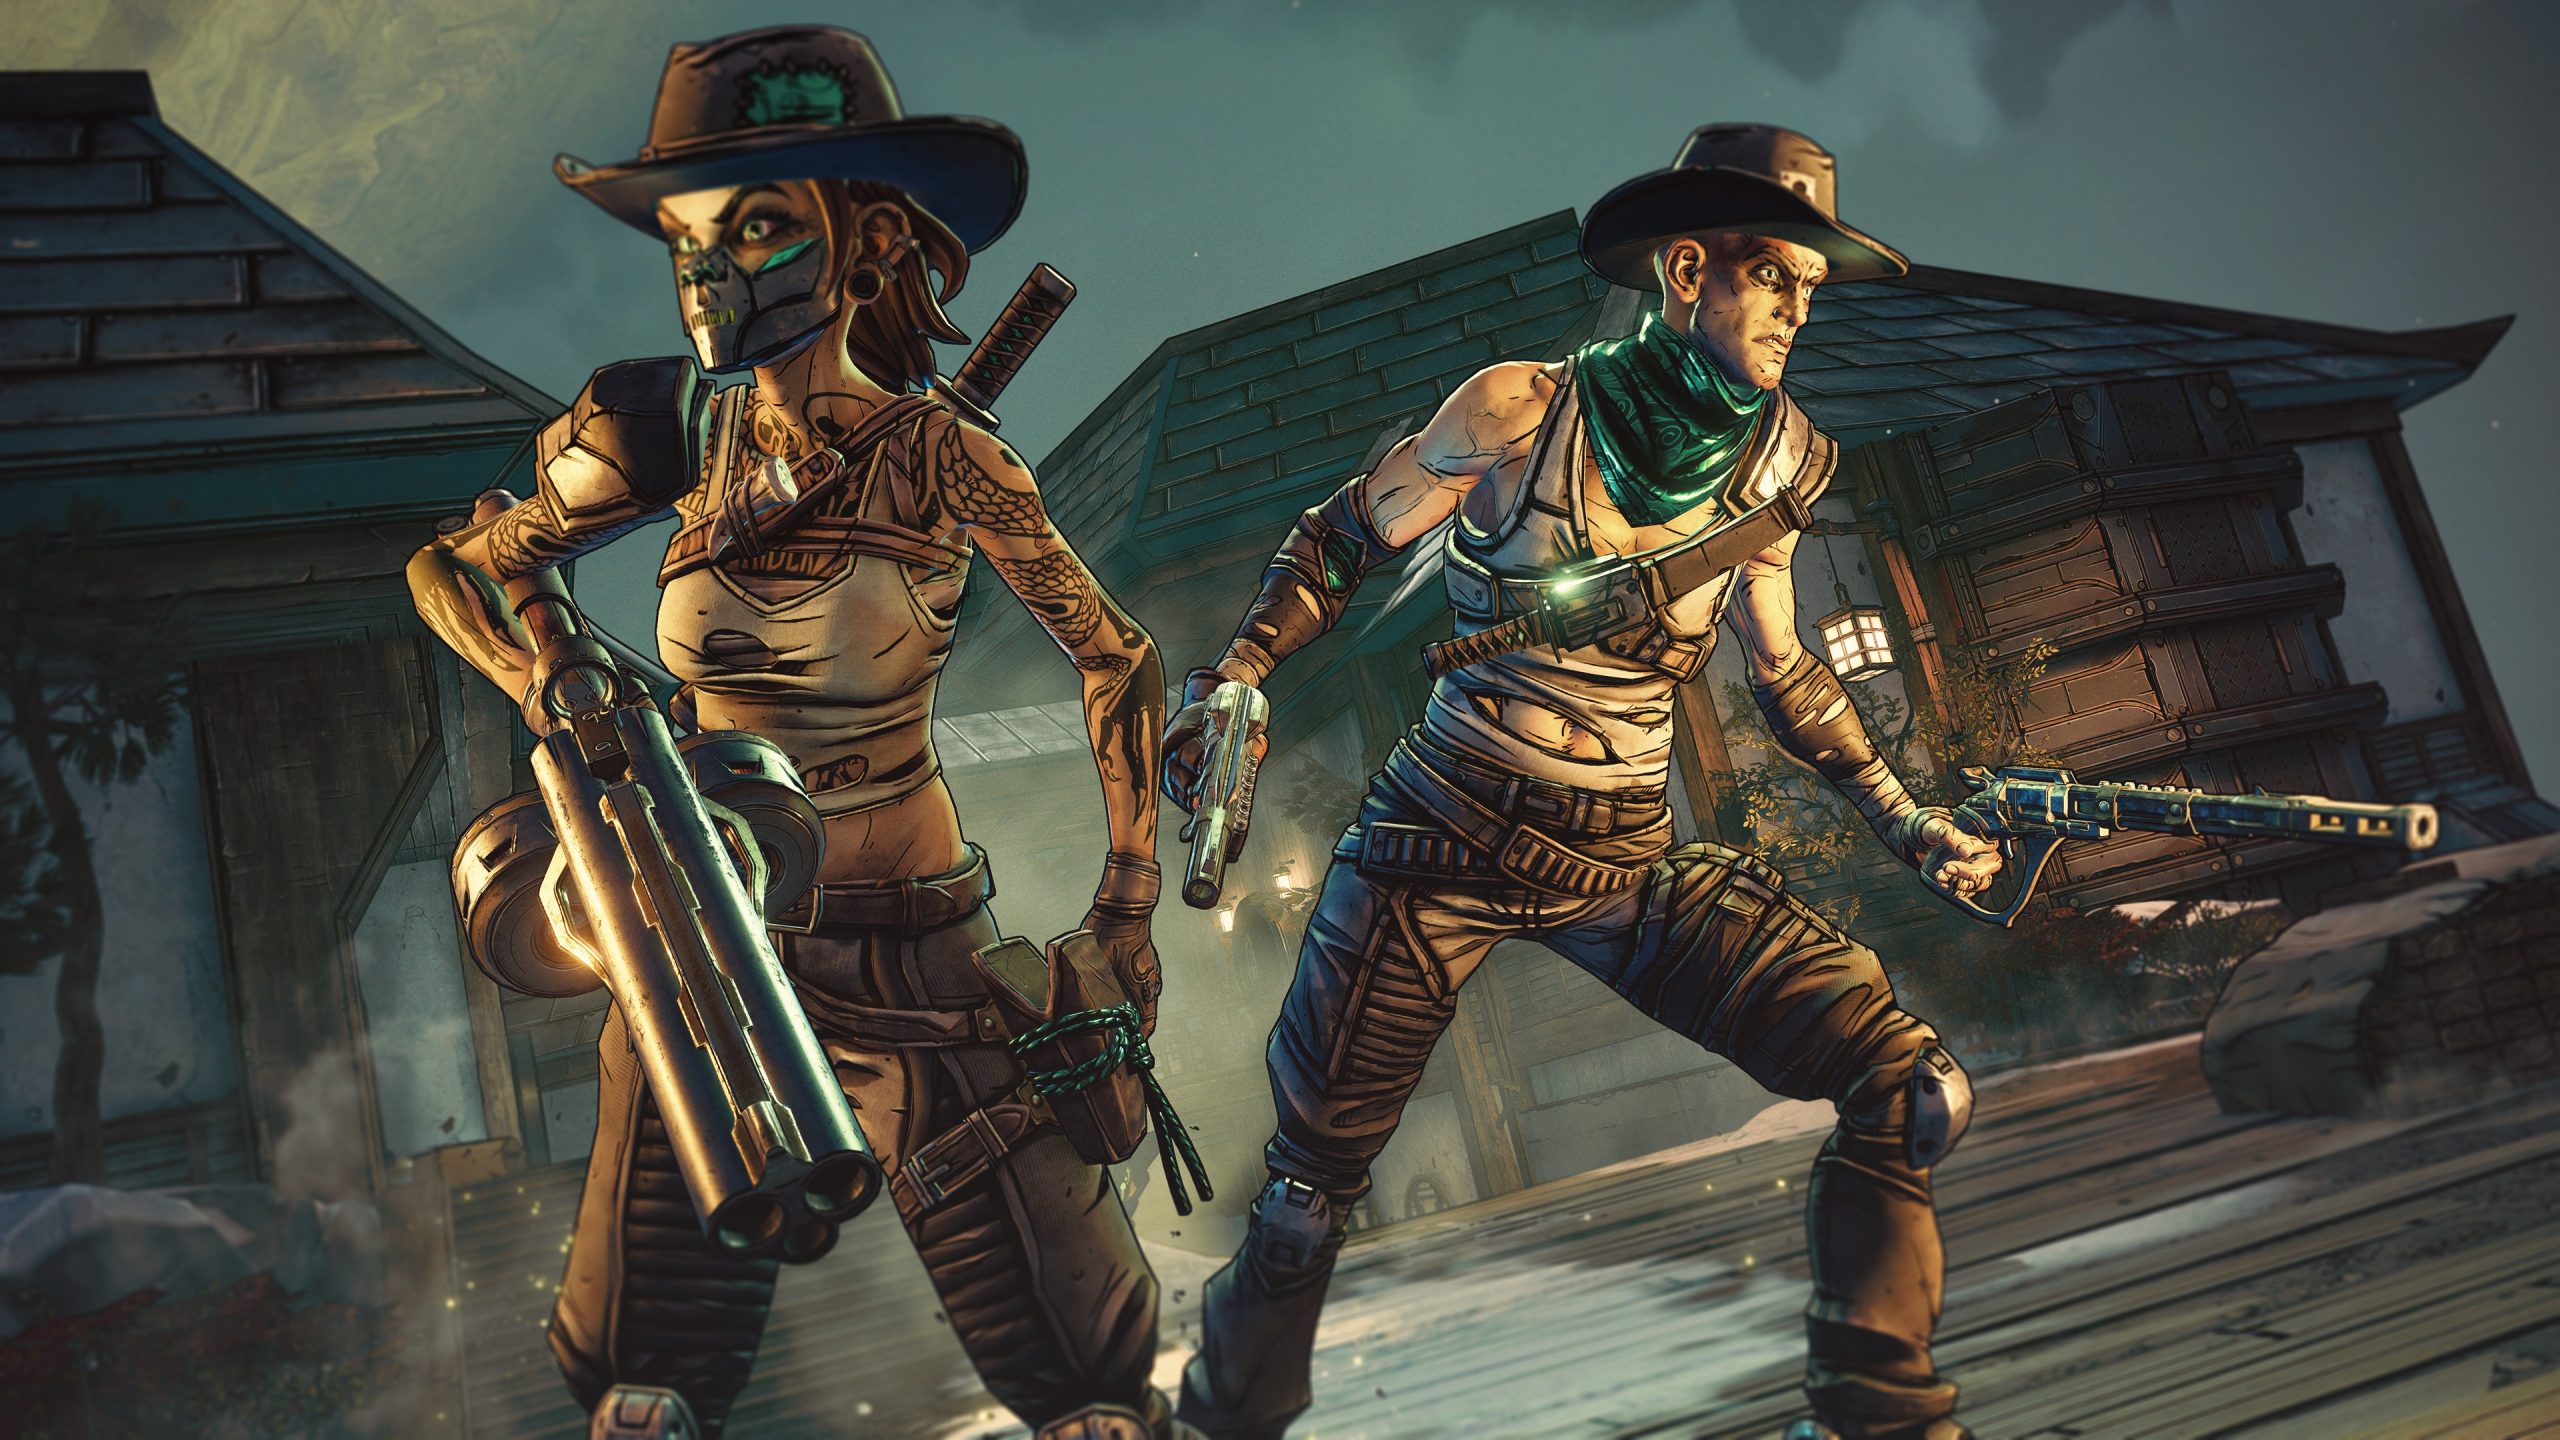 Borderlands 3 – Bounty of Blood: A Fistful Redemption launches June 25